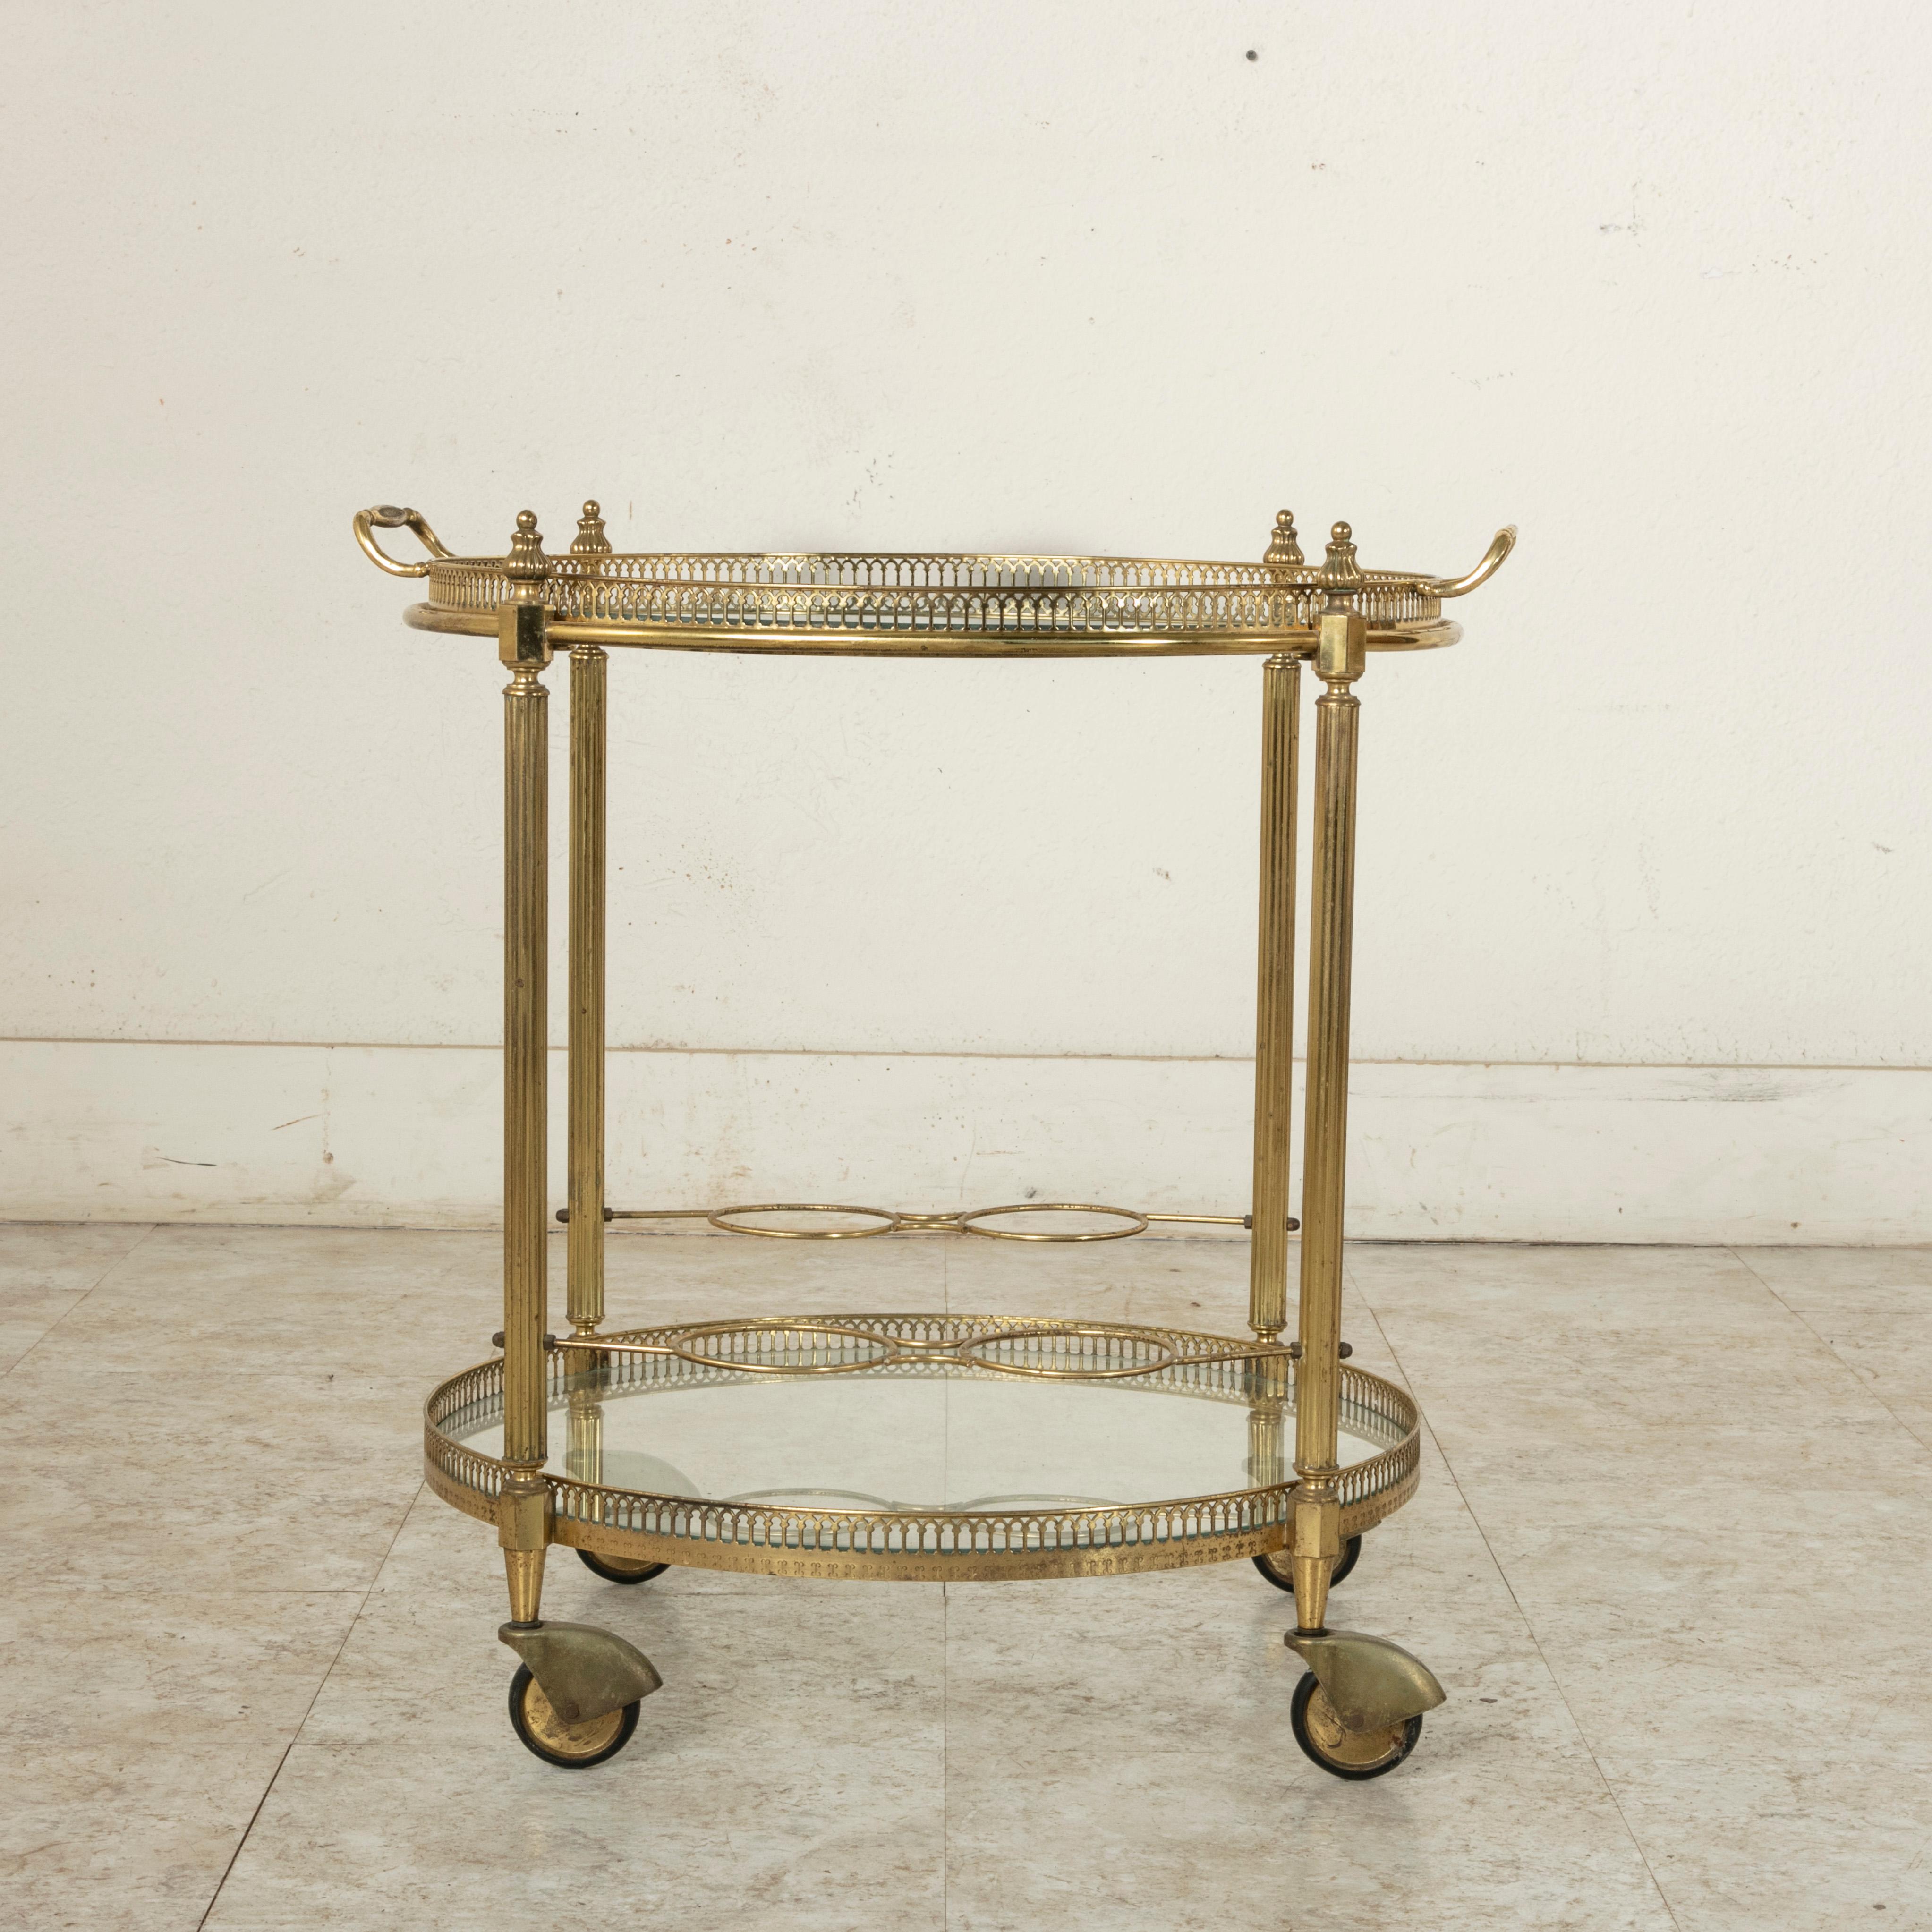 This mid-20th century French round brass bar cart features fluted legs finished with Louis XVI inspired finials and two glass shelves surrounded by a pierced bronze gallery. The upper shelf also serves as a removable serving tray with two handles to